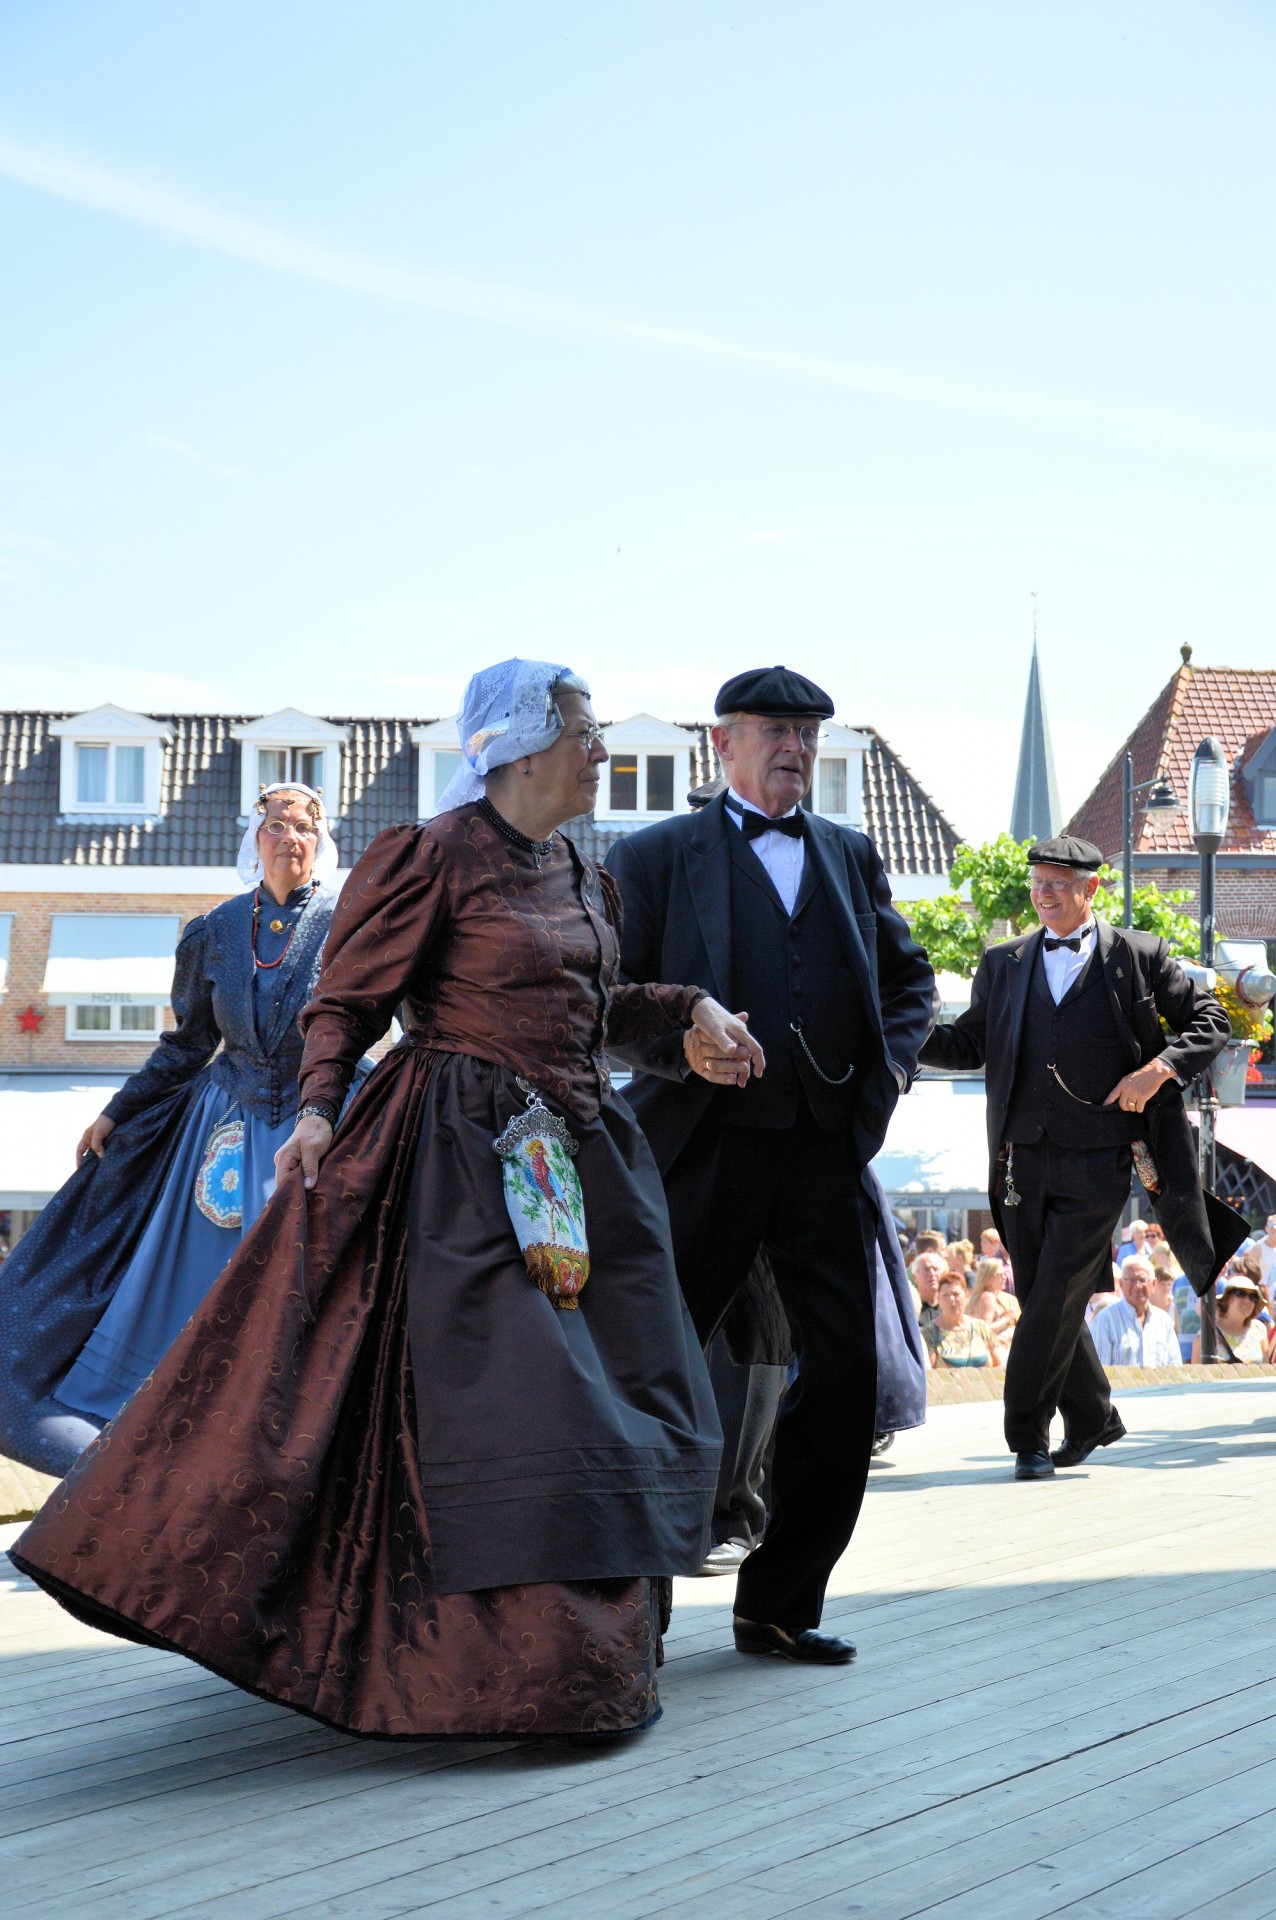 tradition holland dancing free photo